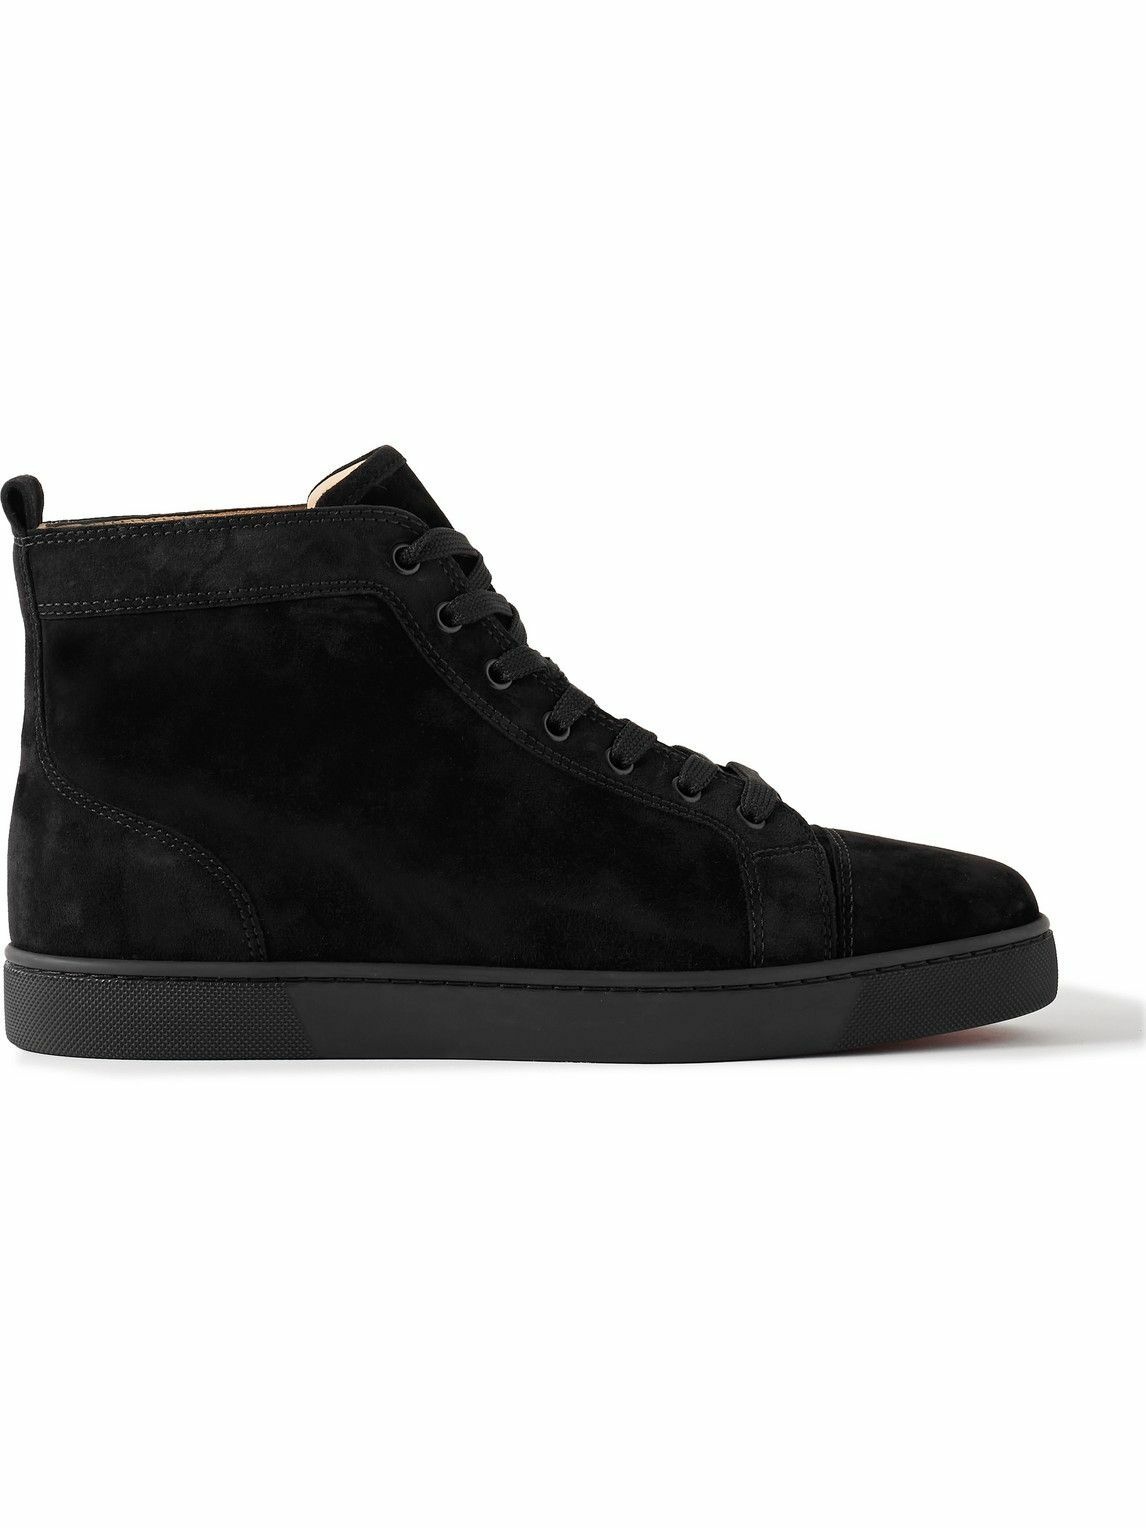 Photo: Christian Louboutin - Louis Logo-Embellished Suede High-Top Sneakers - Black